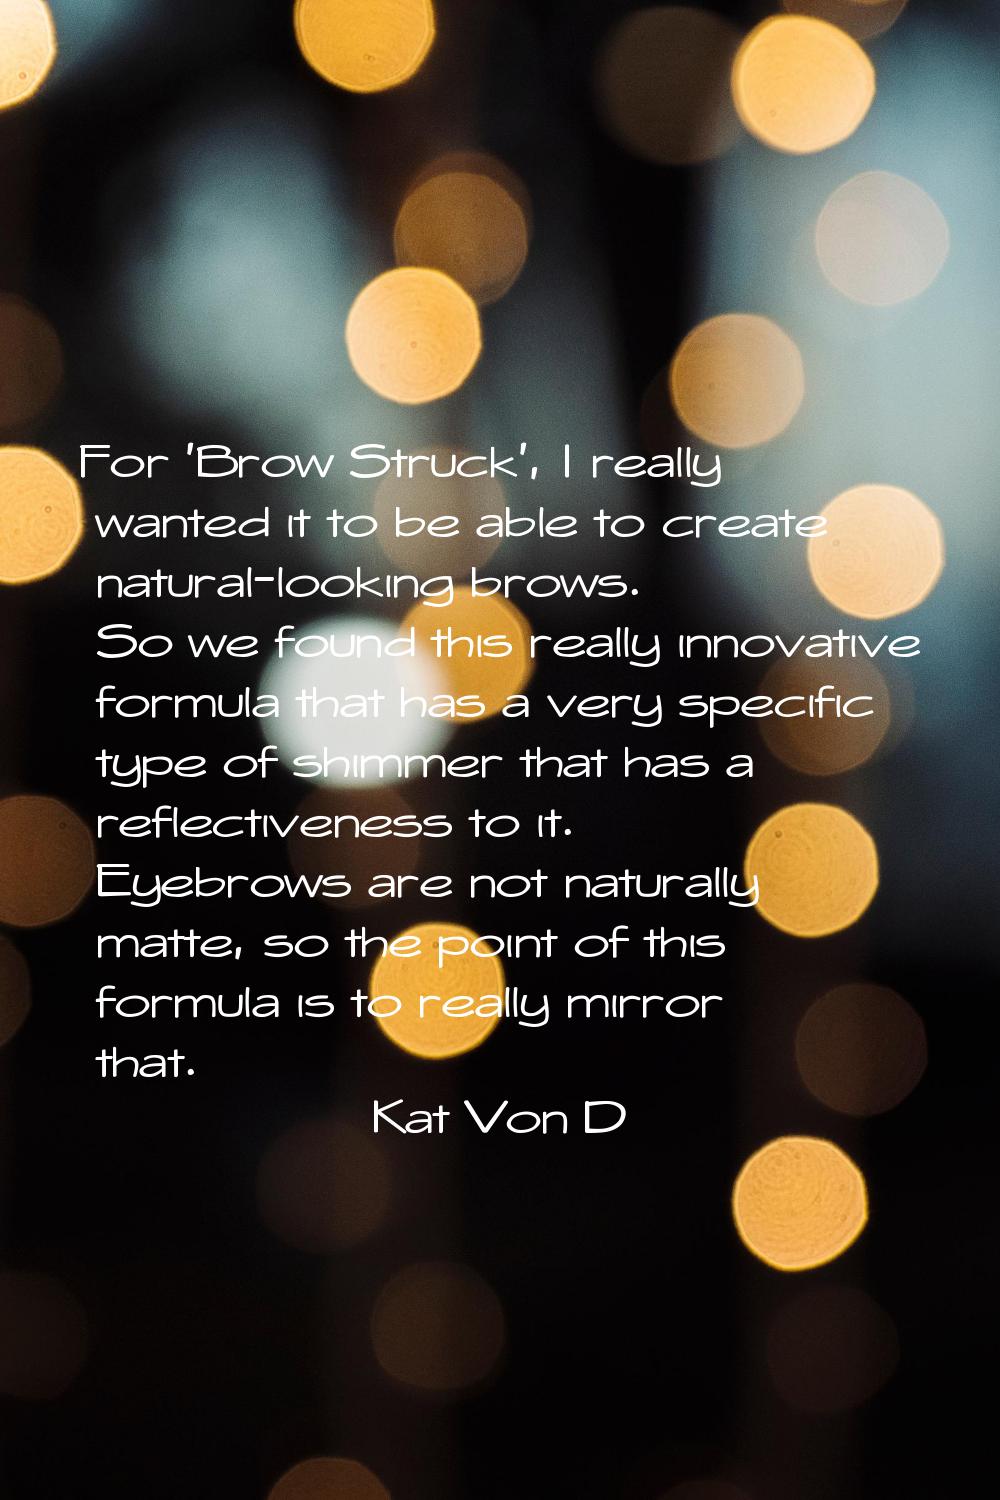 For 'Brow Struck', I really wanted it to be able to create natural-looking brows. So we found this 